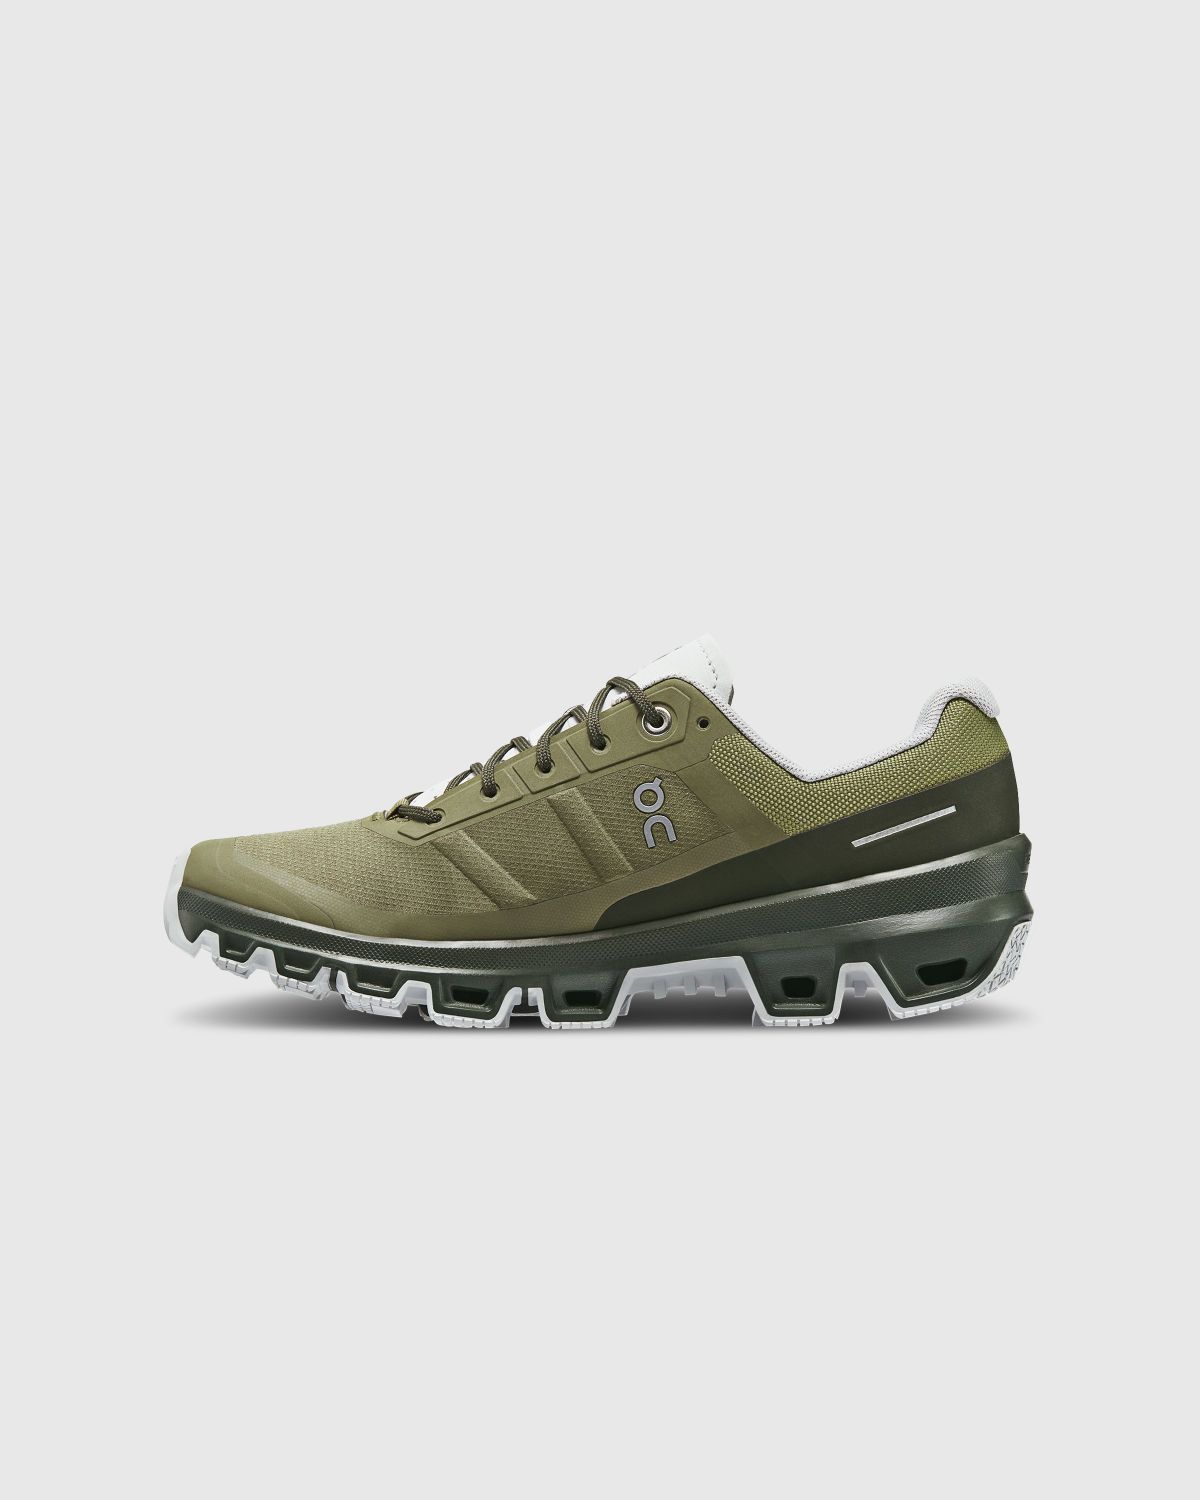 On – Cloudventure Olive/Fir - Sneakers - Green - Image 2